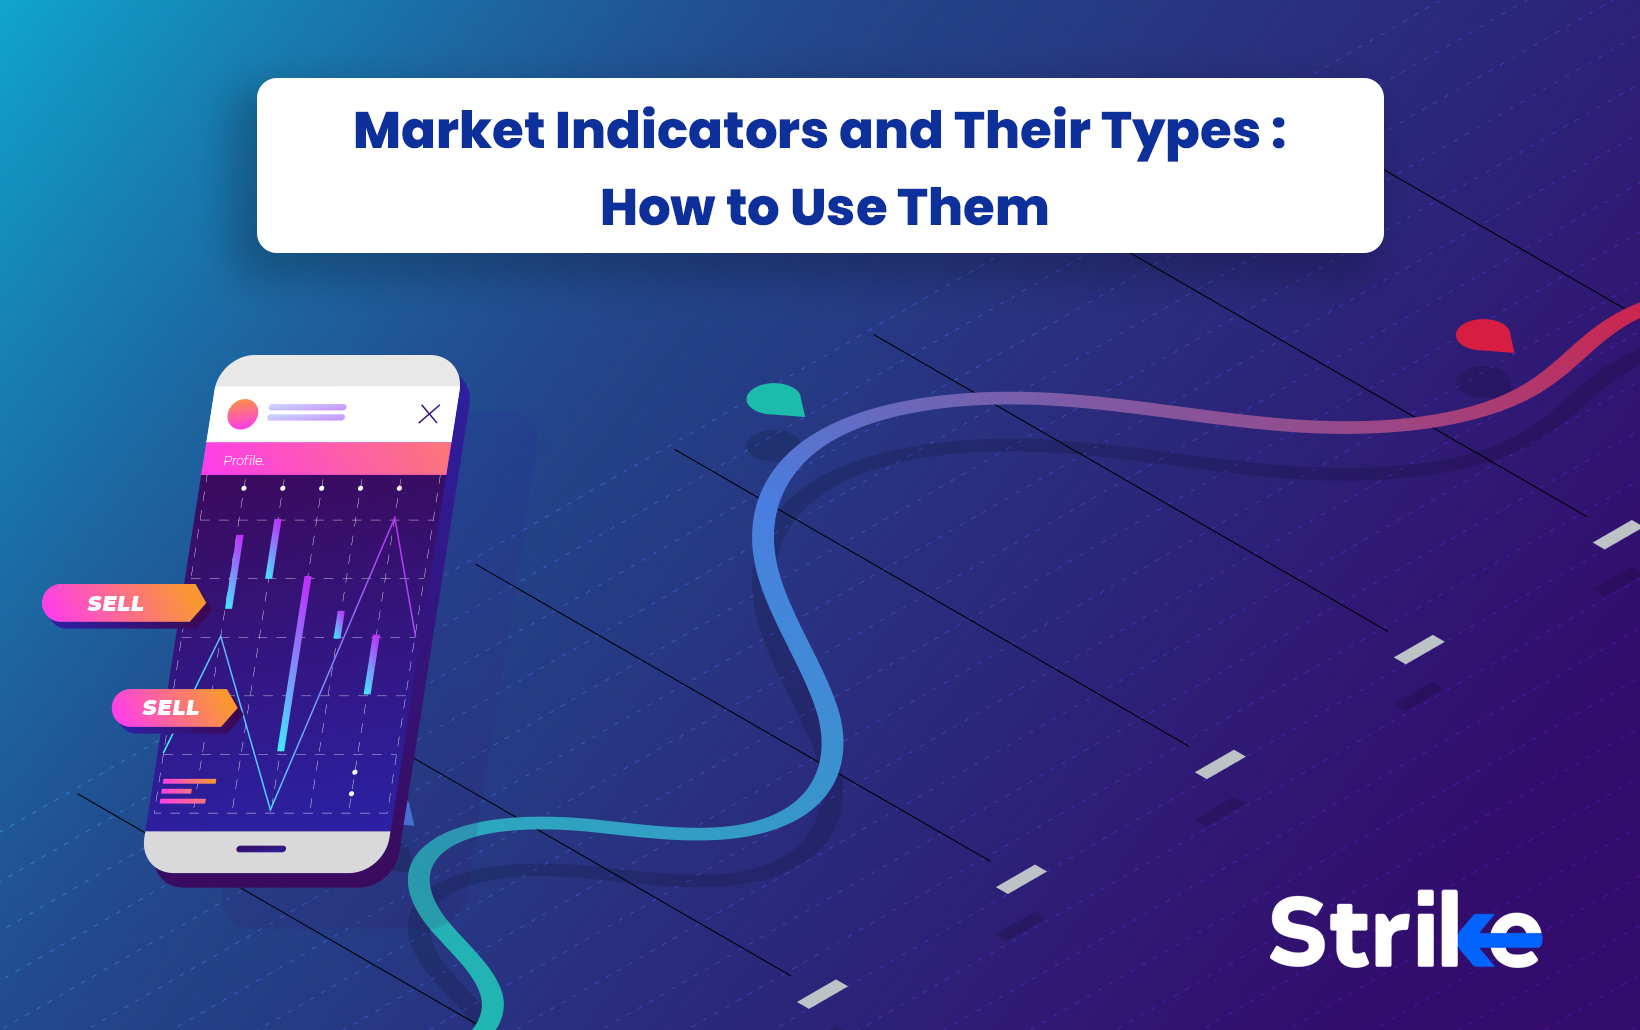 Market Indicators and Their Types: How to Use Them